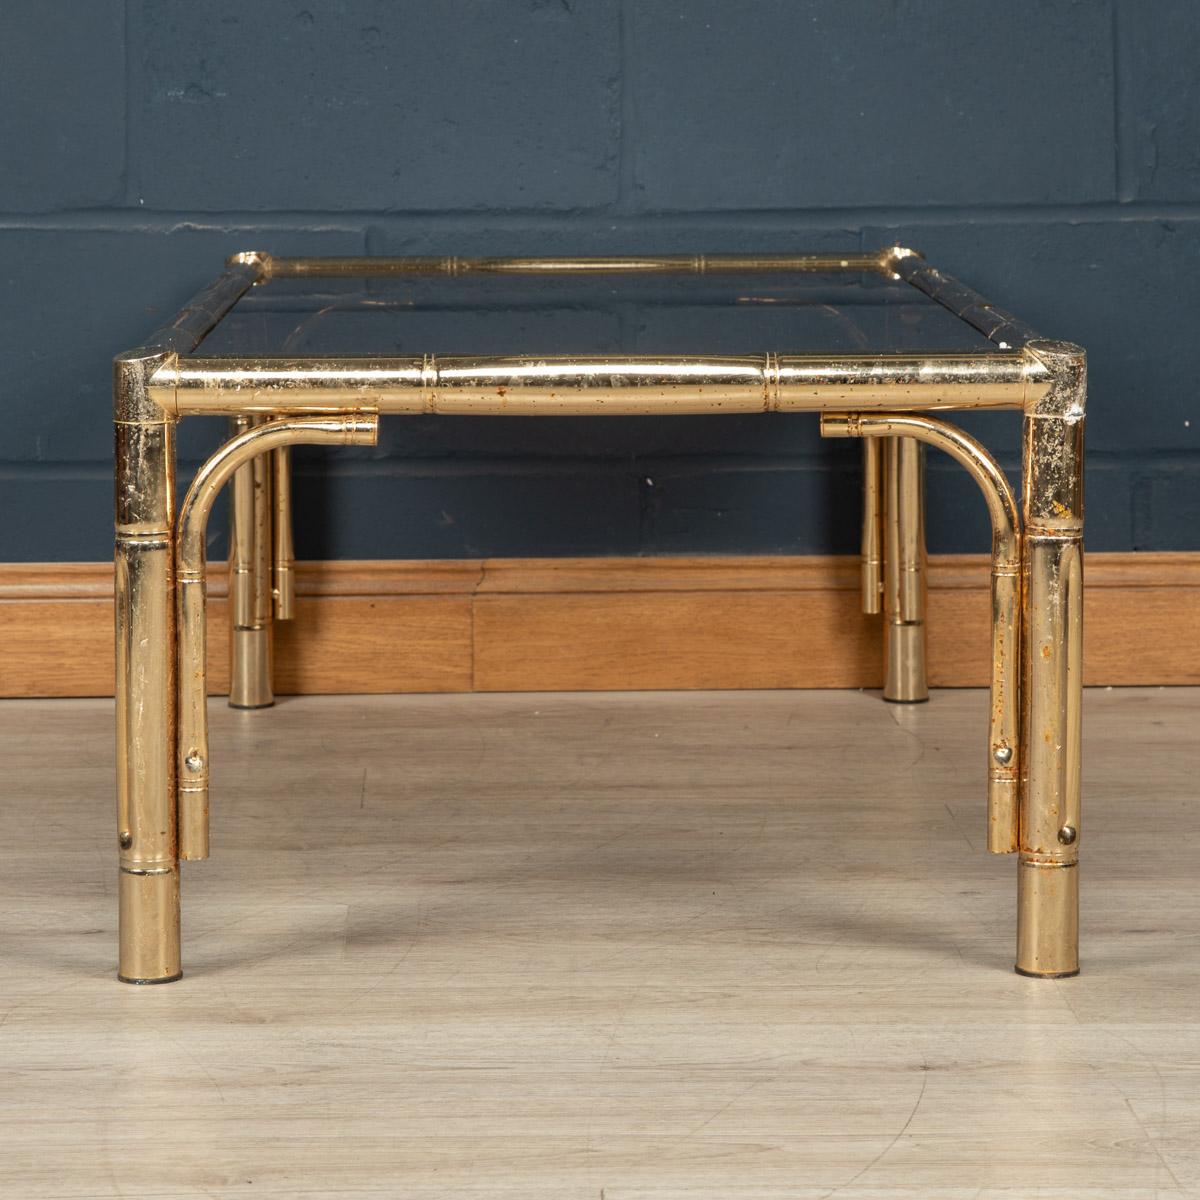 20th Century France Brass Coffee Table Attributable To Maison Jansen, c.1970 In Good Condition For Sale In Royal Tunbridge Wells, Kent